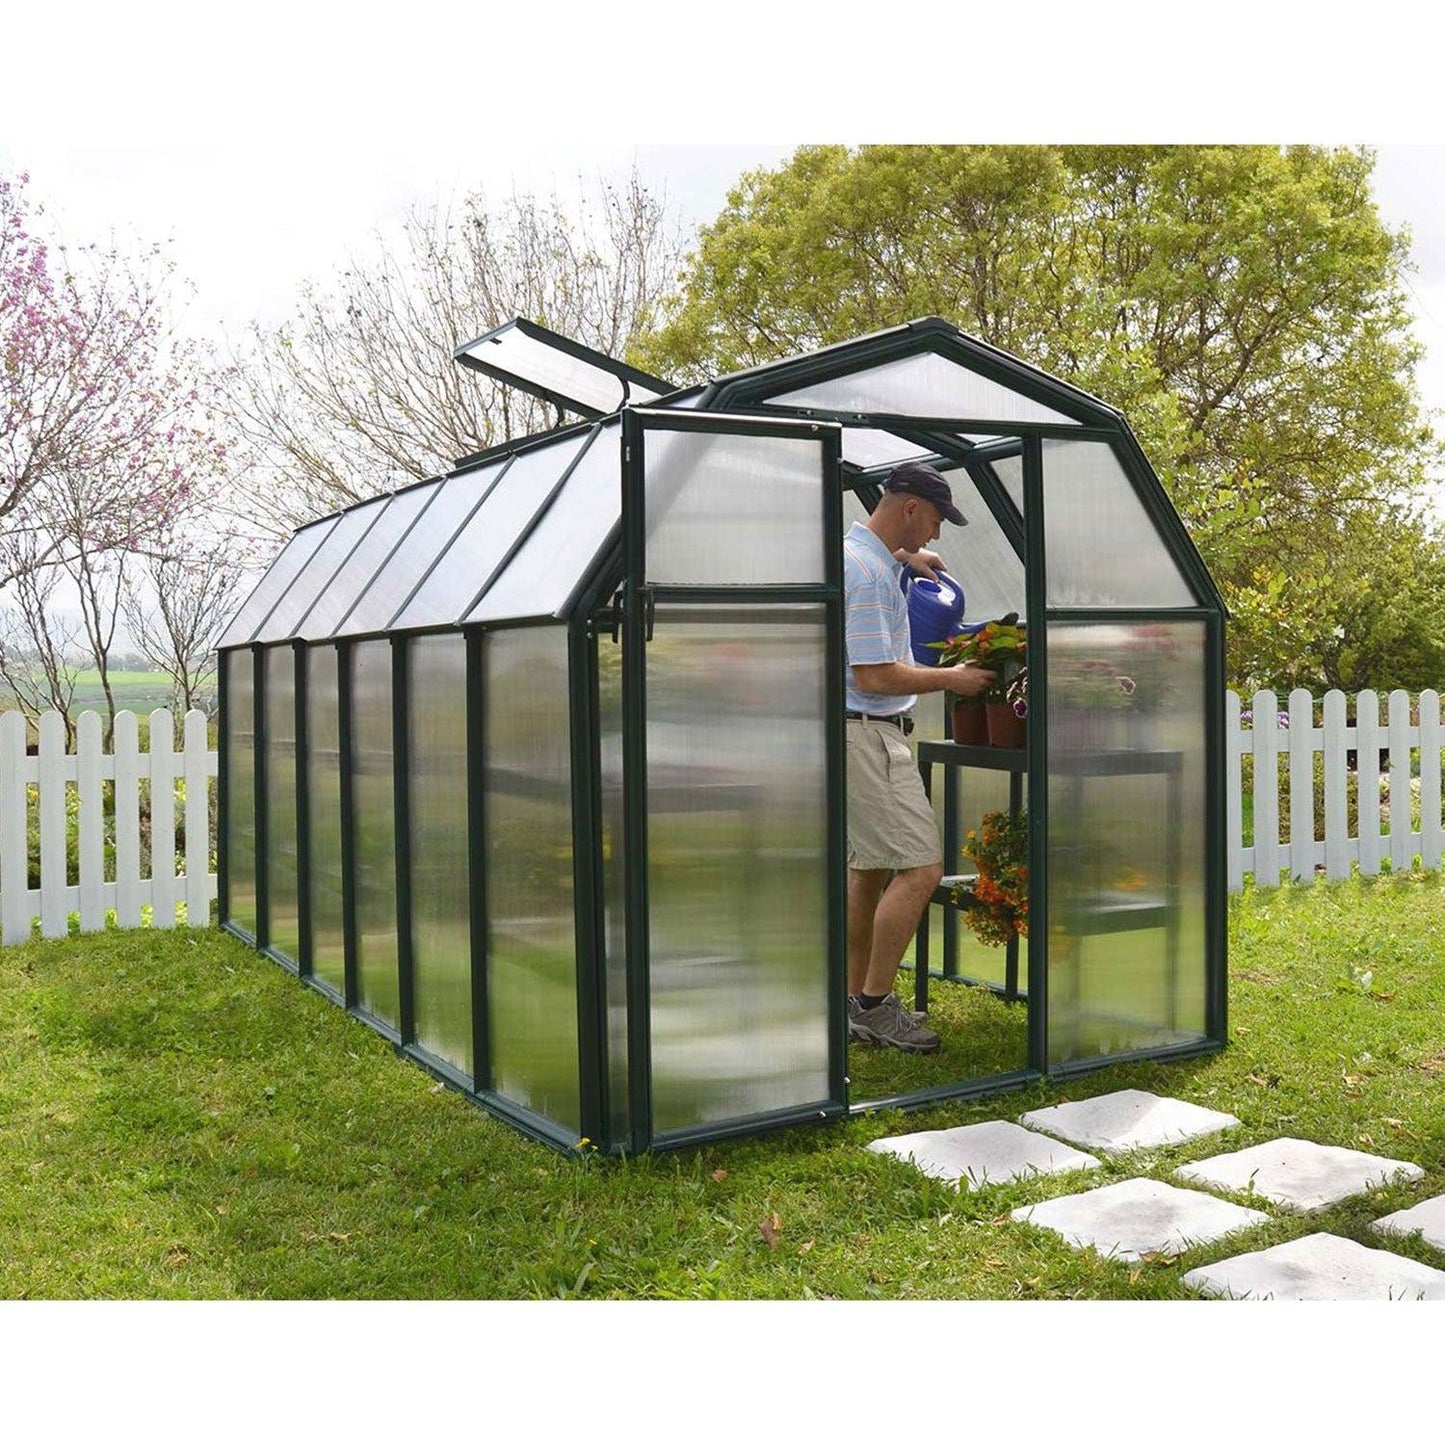 Rion EcoGrow Greenhouse 6 x 12 ft. - Delightful Yard